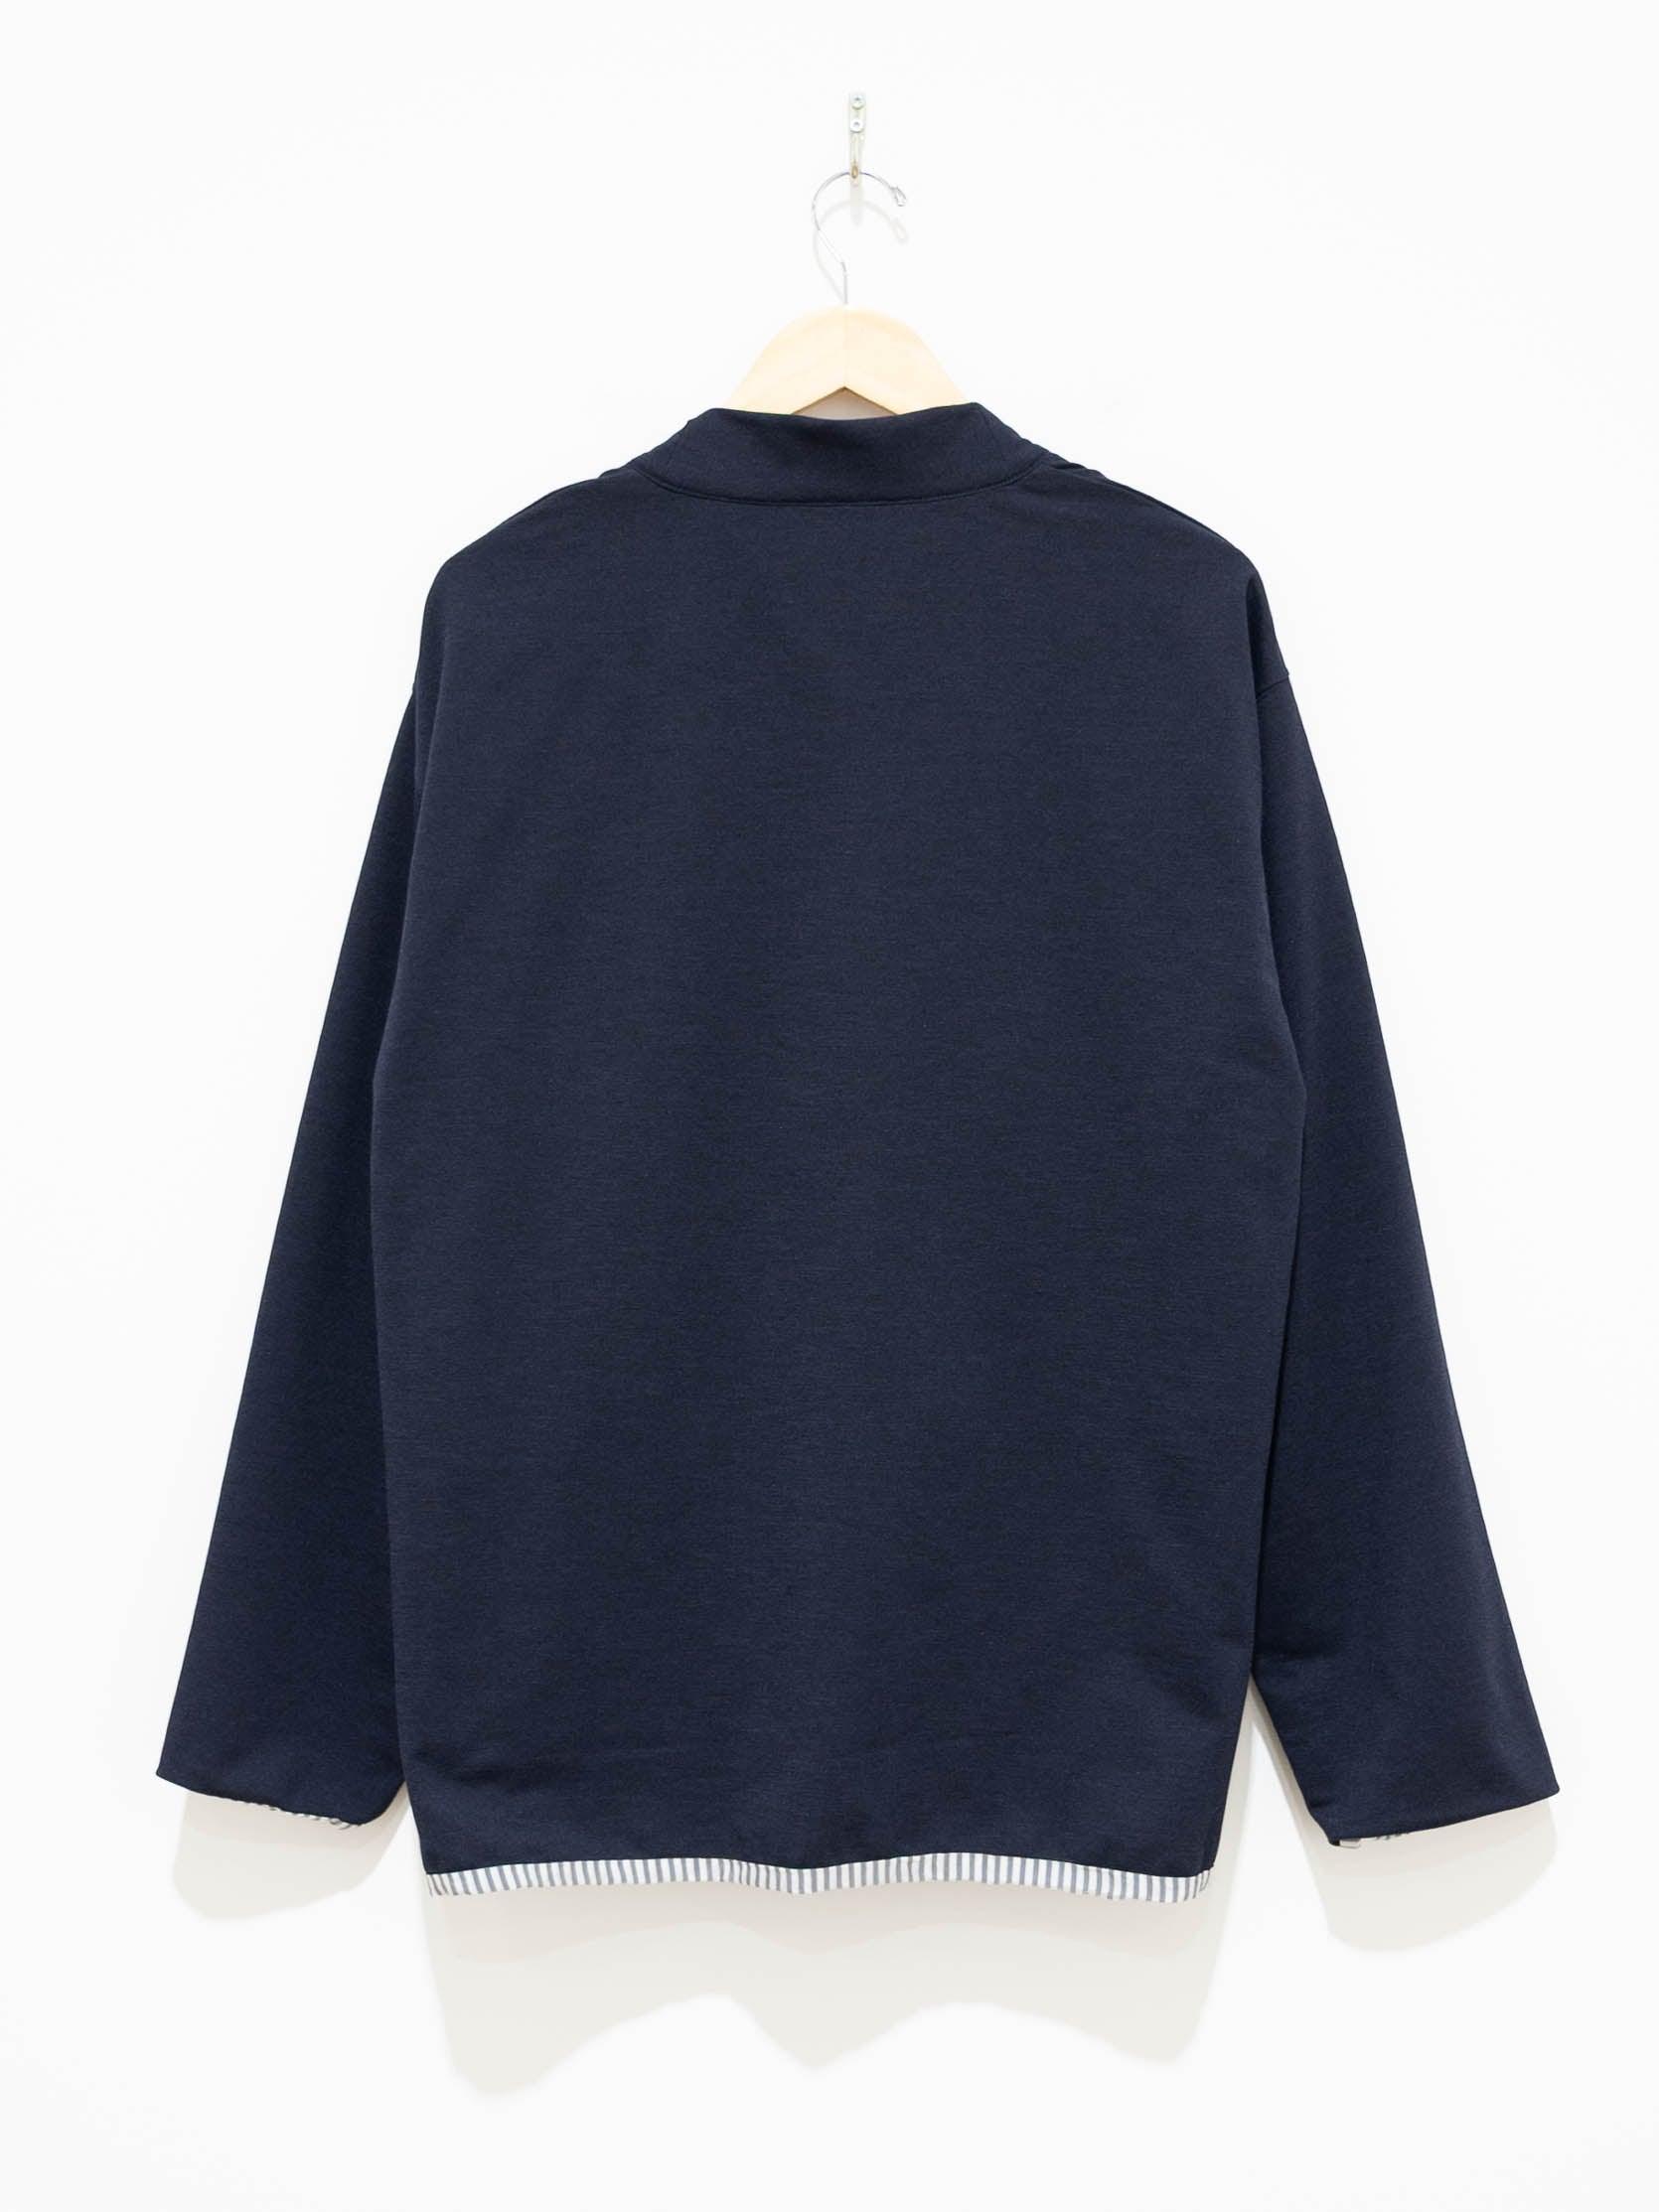 Namu Shop - ts(s) Poly Pique Jersey Lined Easy Cardigan - Navy